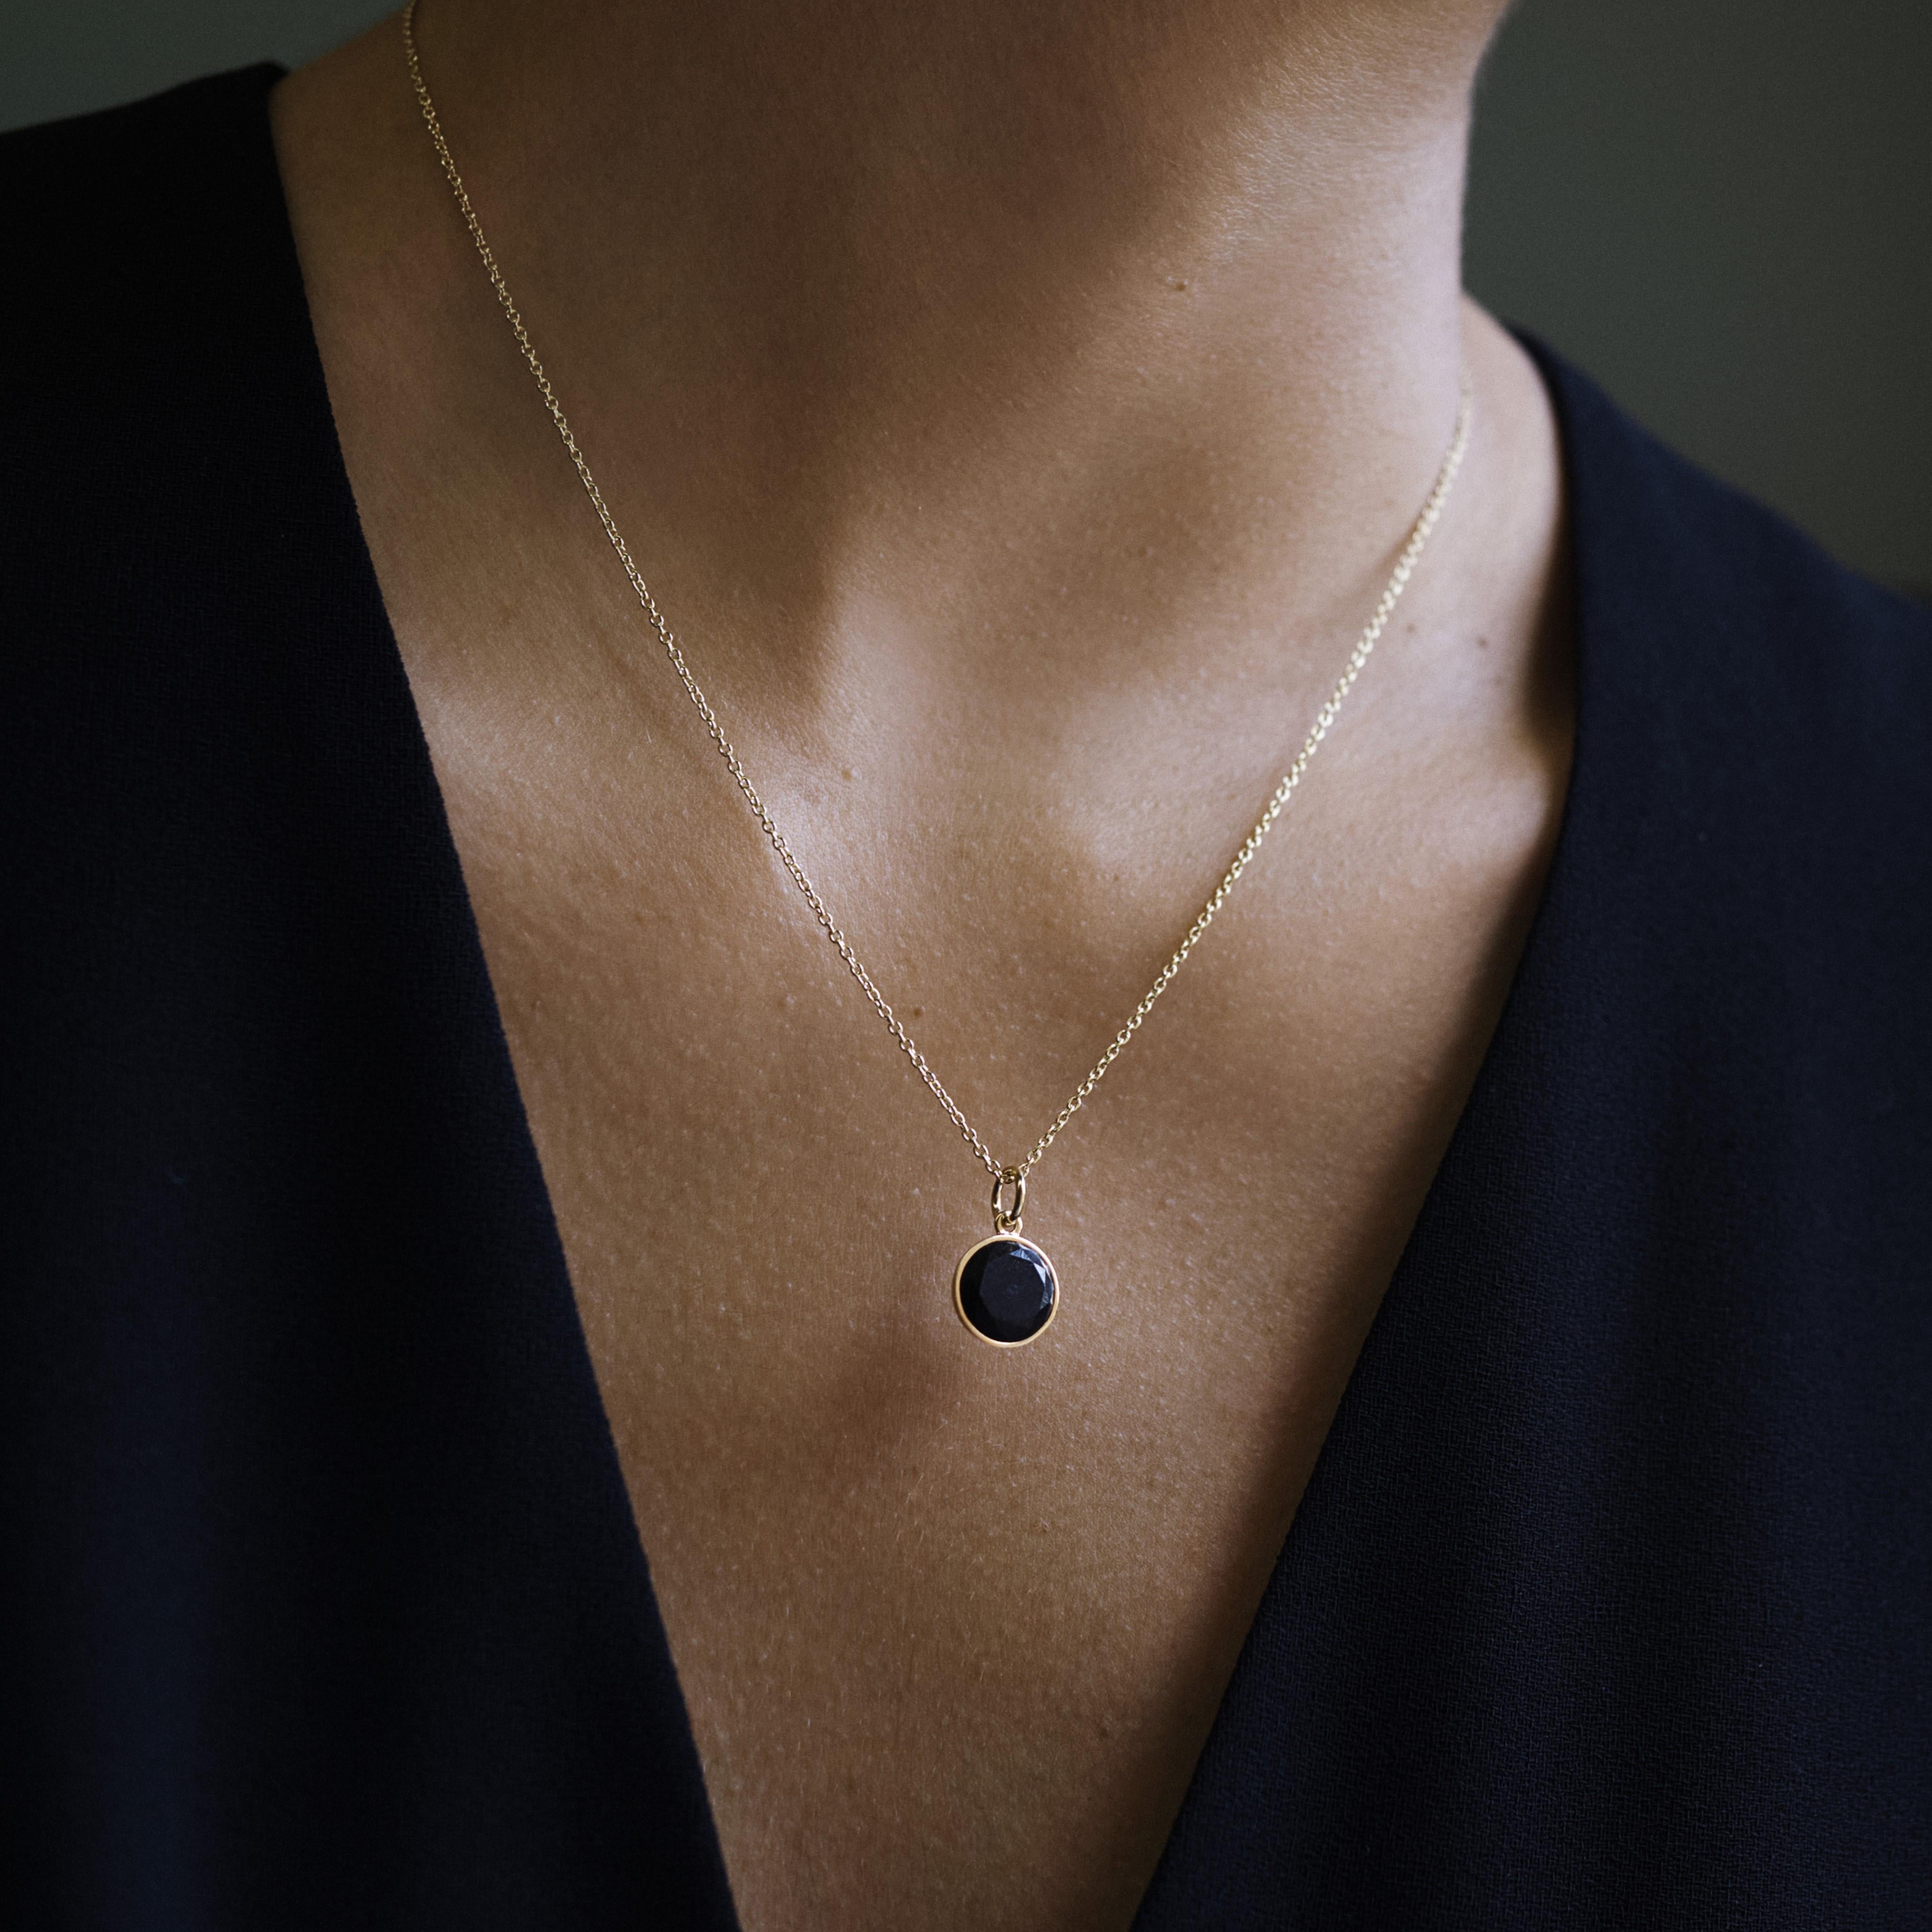 Also available in recycled sterling silver and combined with pendant.

The gorgeous ETERNITY pendant with our 45 cm chain in solid, recycled 18k gold. The pendant is set with a large brilliant-cut Mpingo Blackwood diamond.

Dimensions:
Length: 45 cm